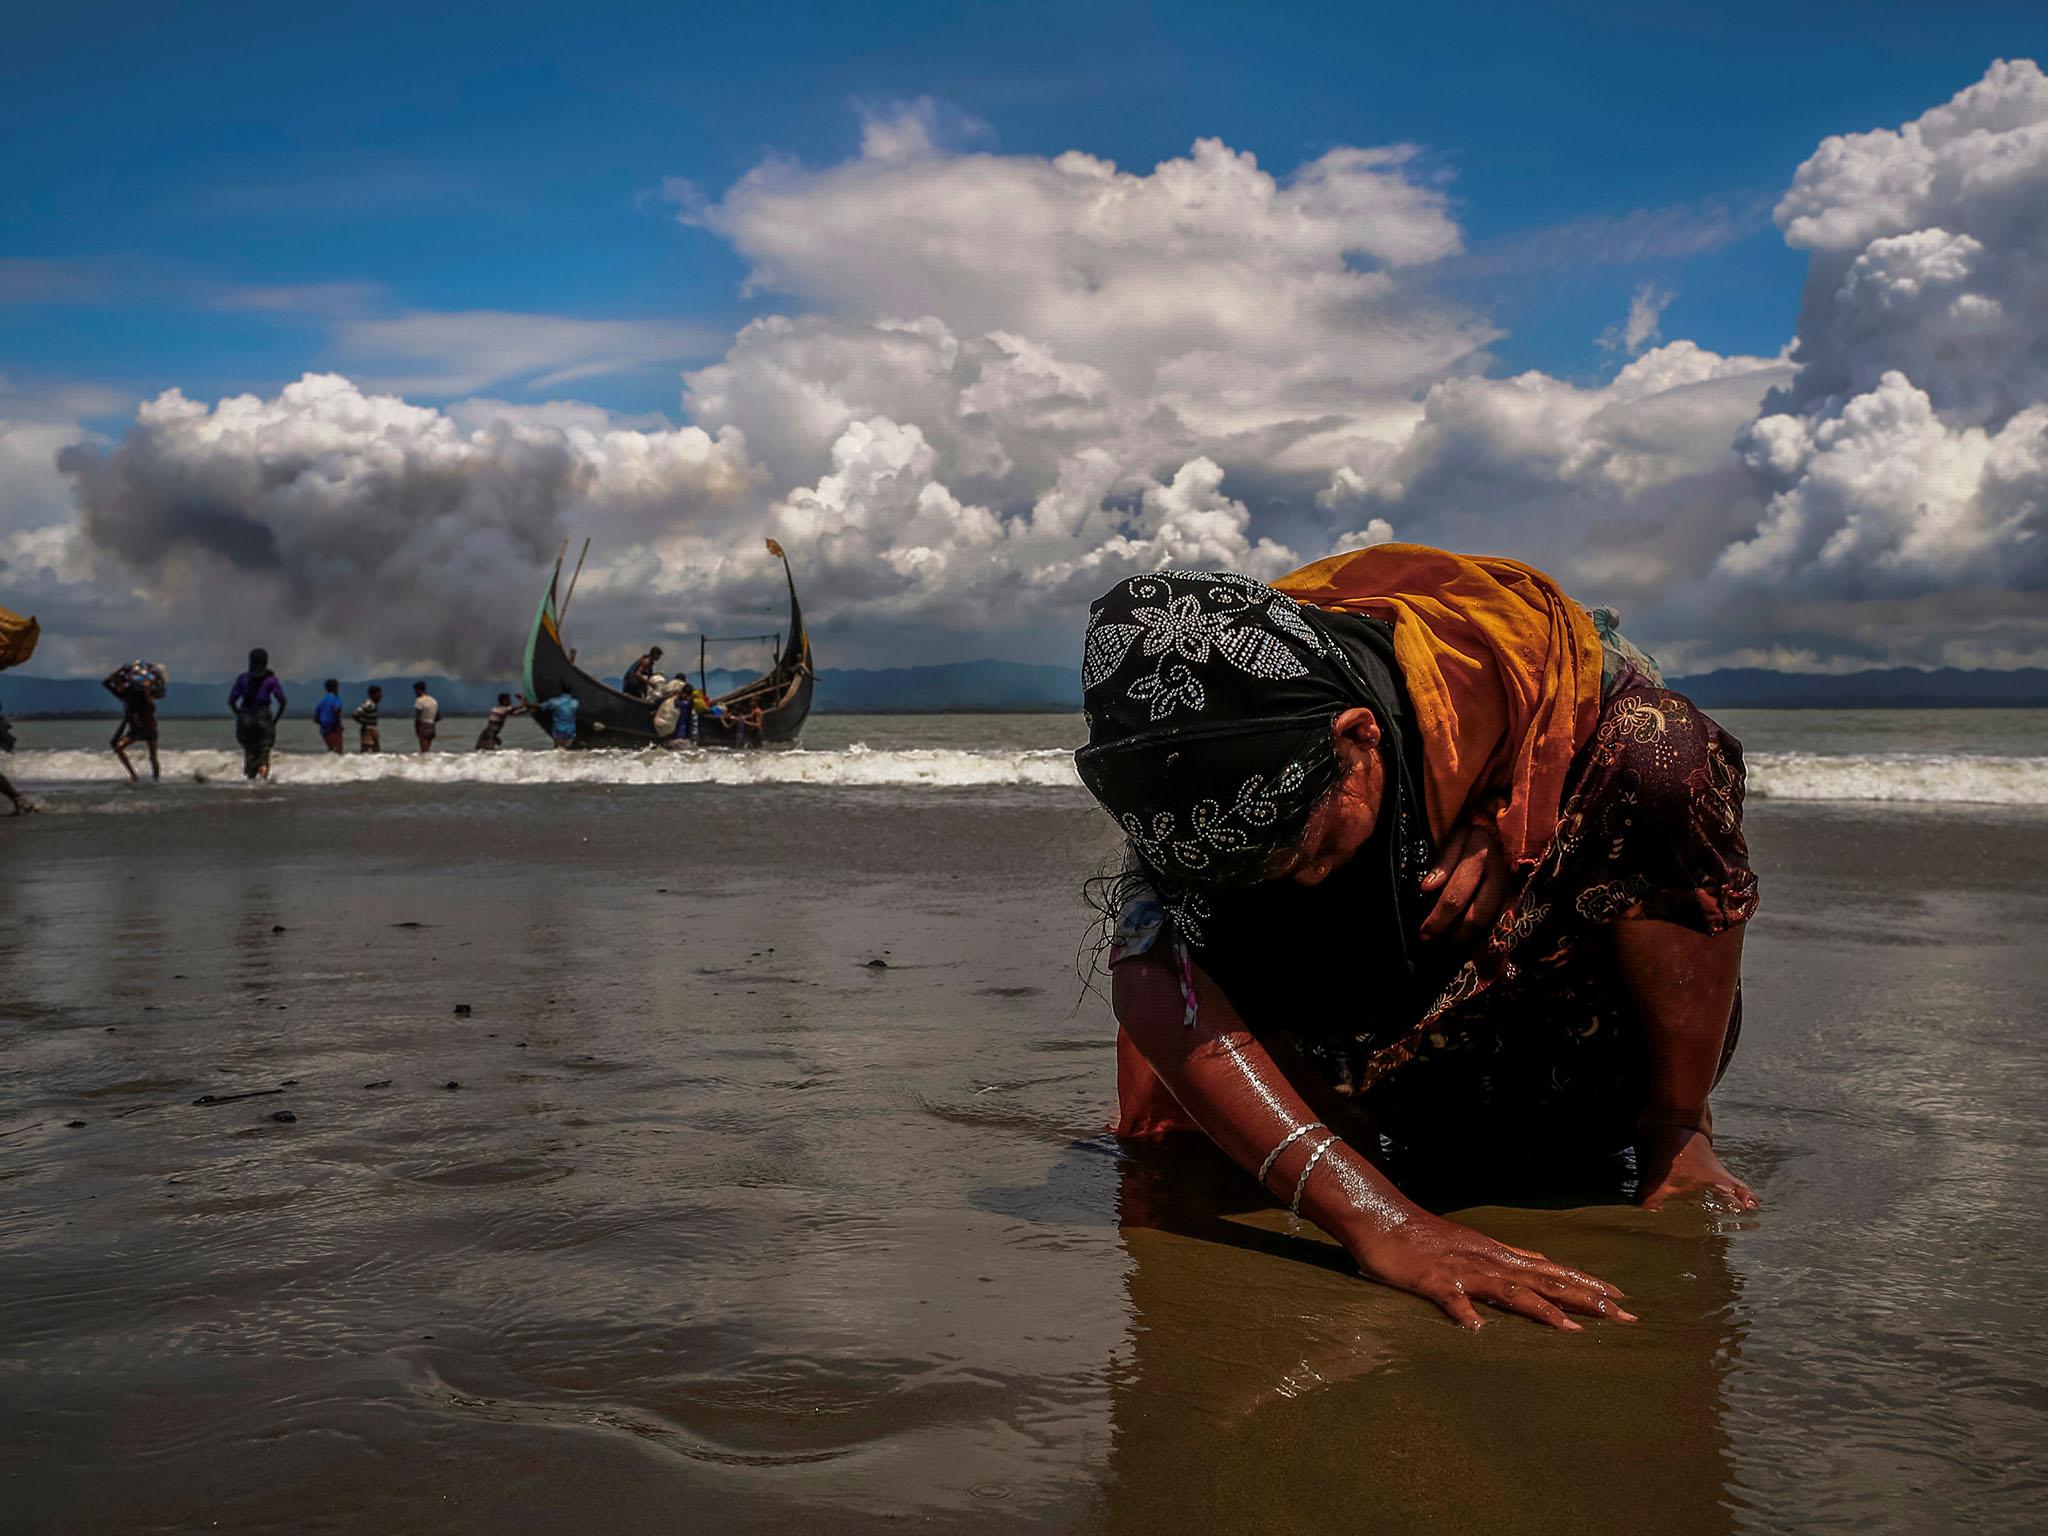 A refugee touches the shore after crossing the Bangladesh-Myanmar border by boat